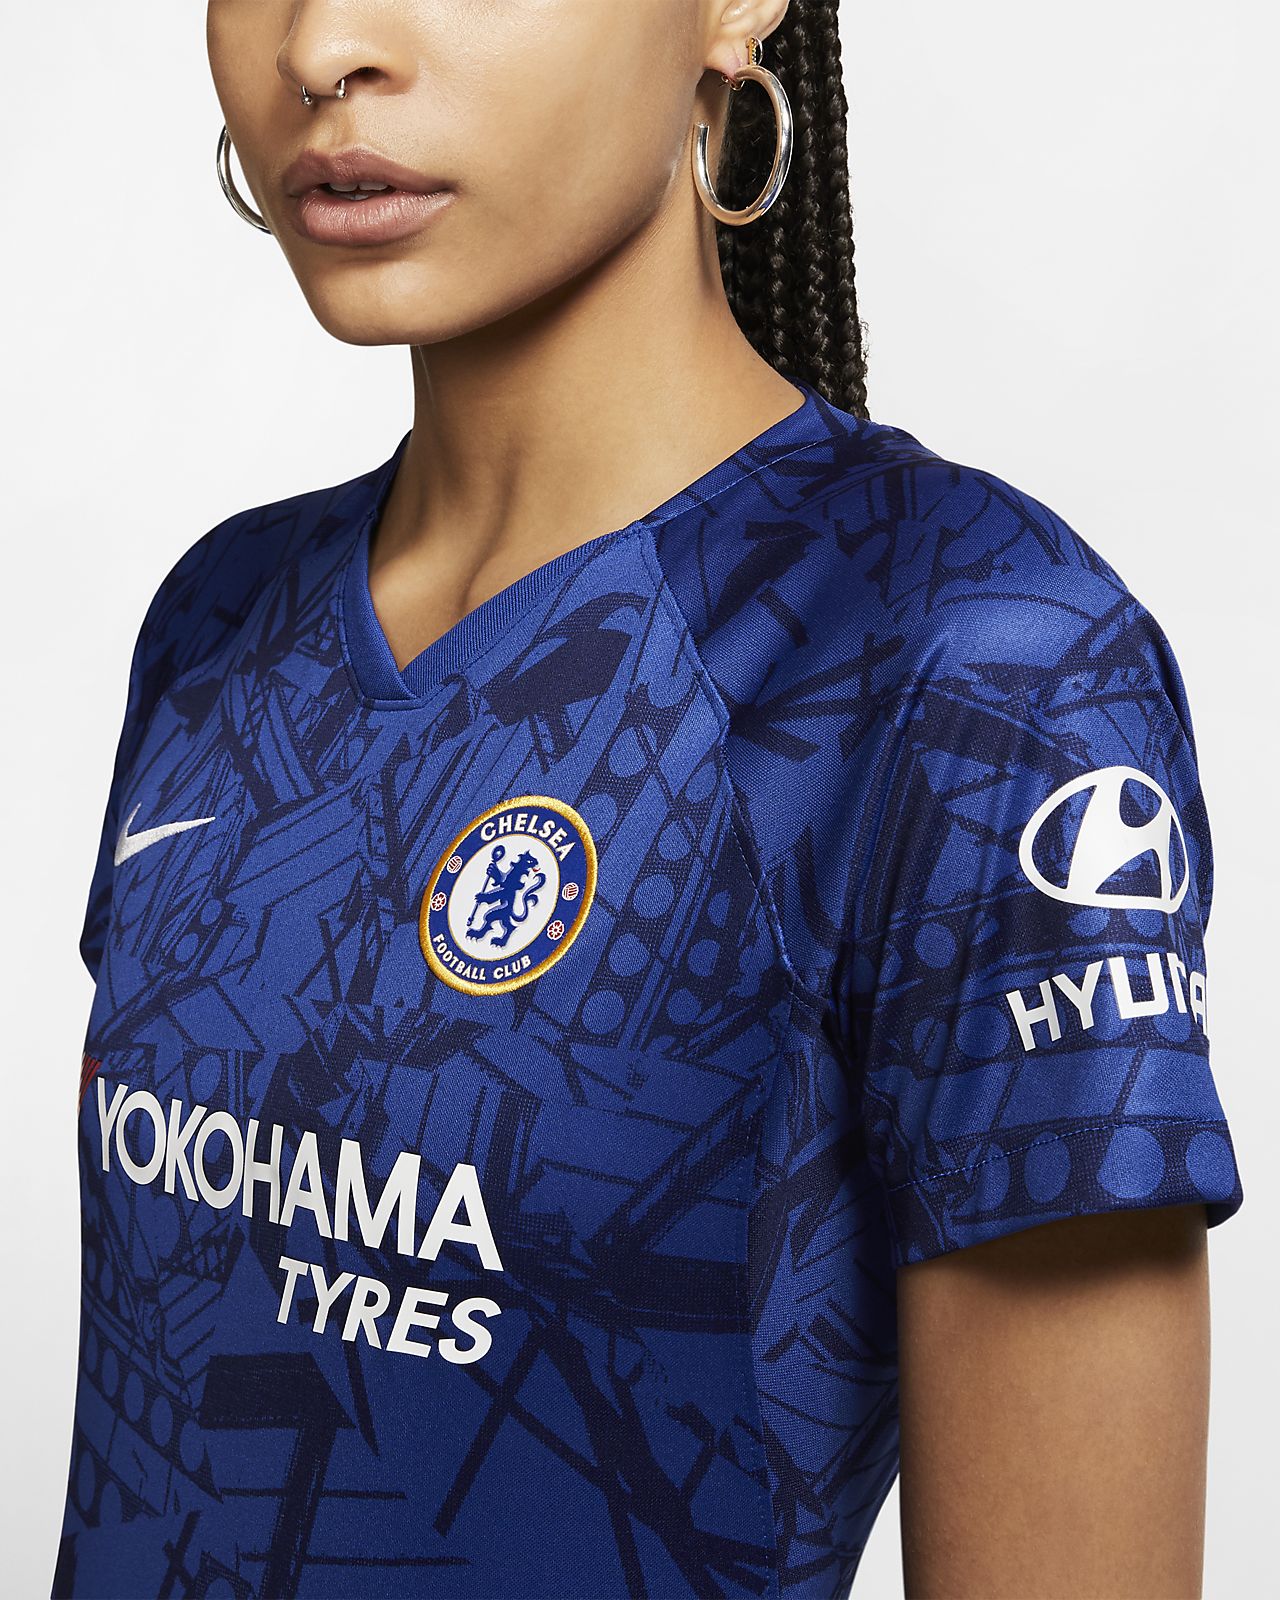 NIKE Official]Chelsea FC 2019/20 